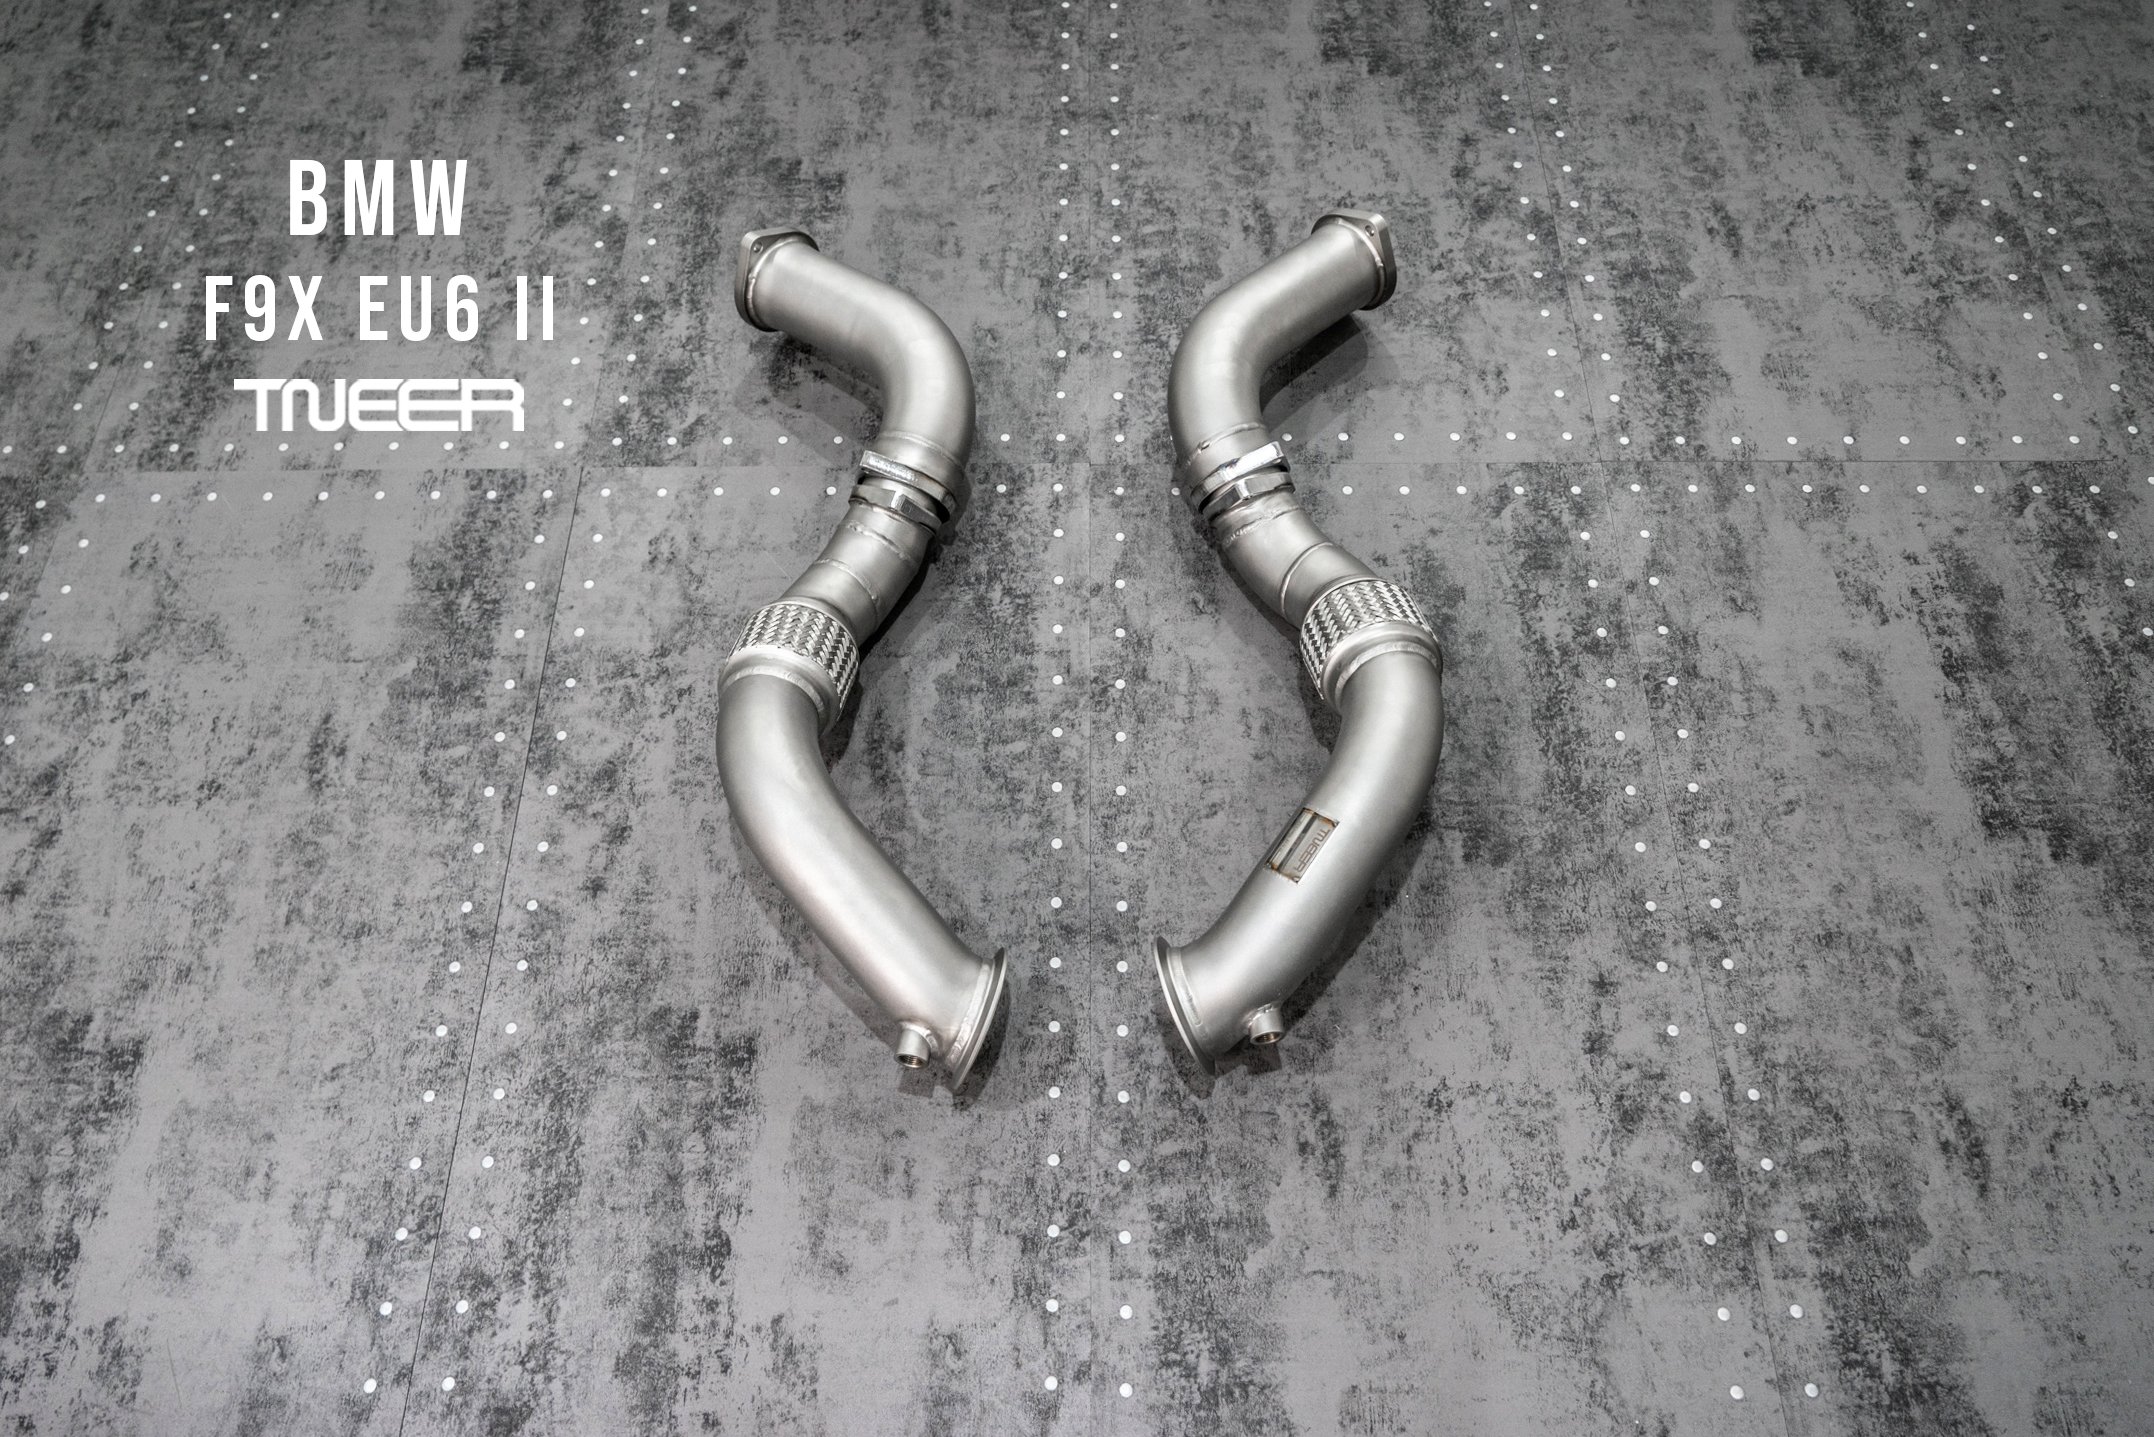 BMW F90 (M5) TNEER Exhaust System with EV and TACS